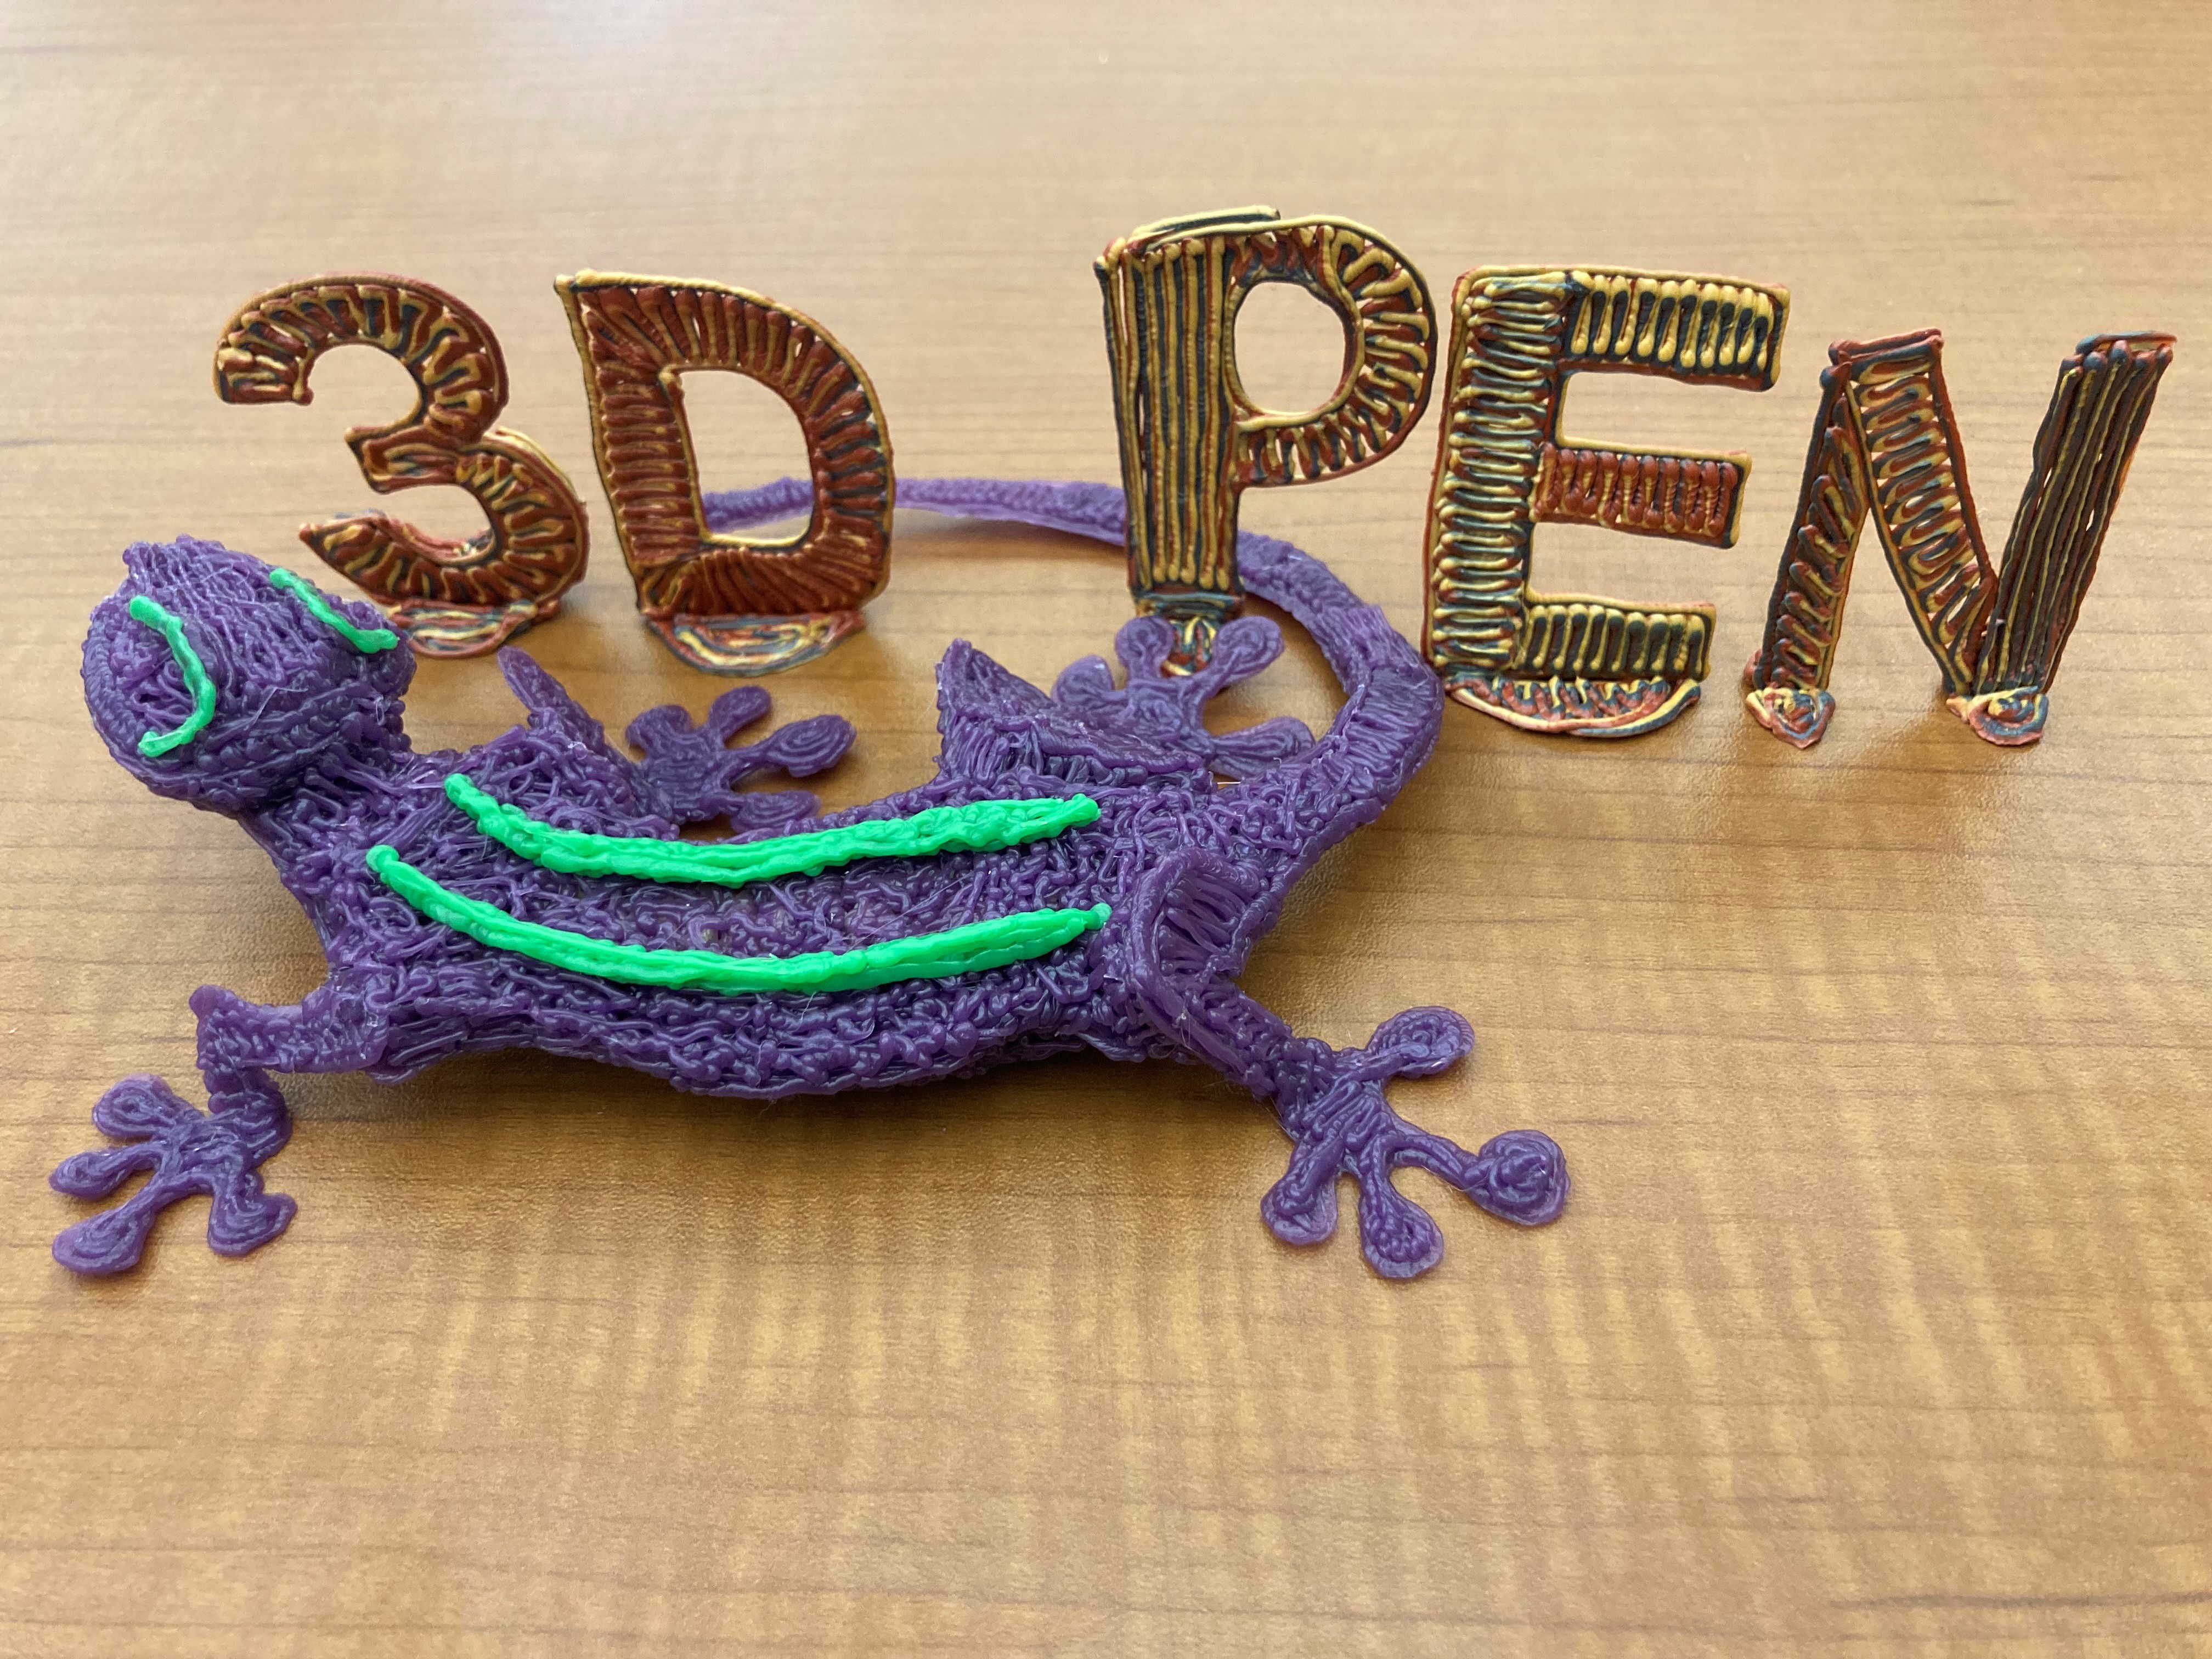 3 dimensional text that reads "3 D P E N" behind a 3 dimensional lizard made from PLA filament